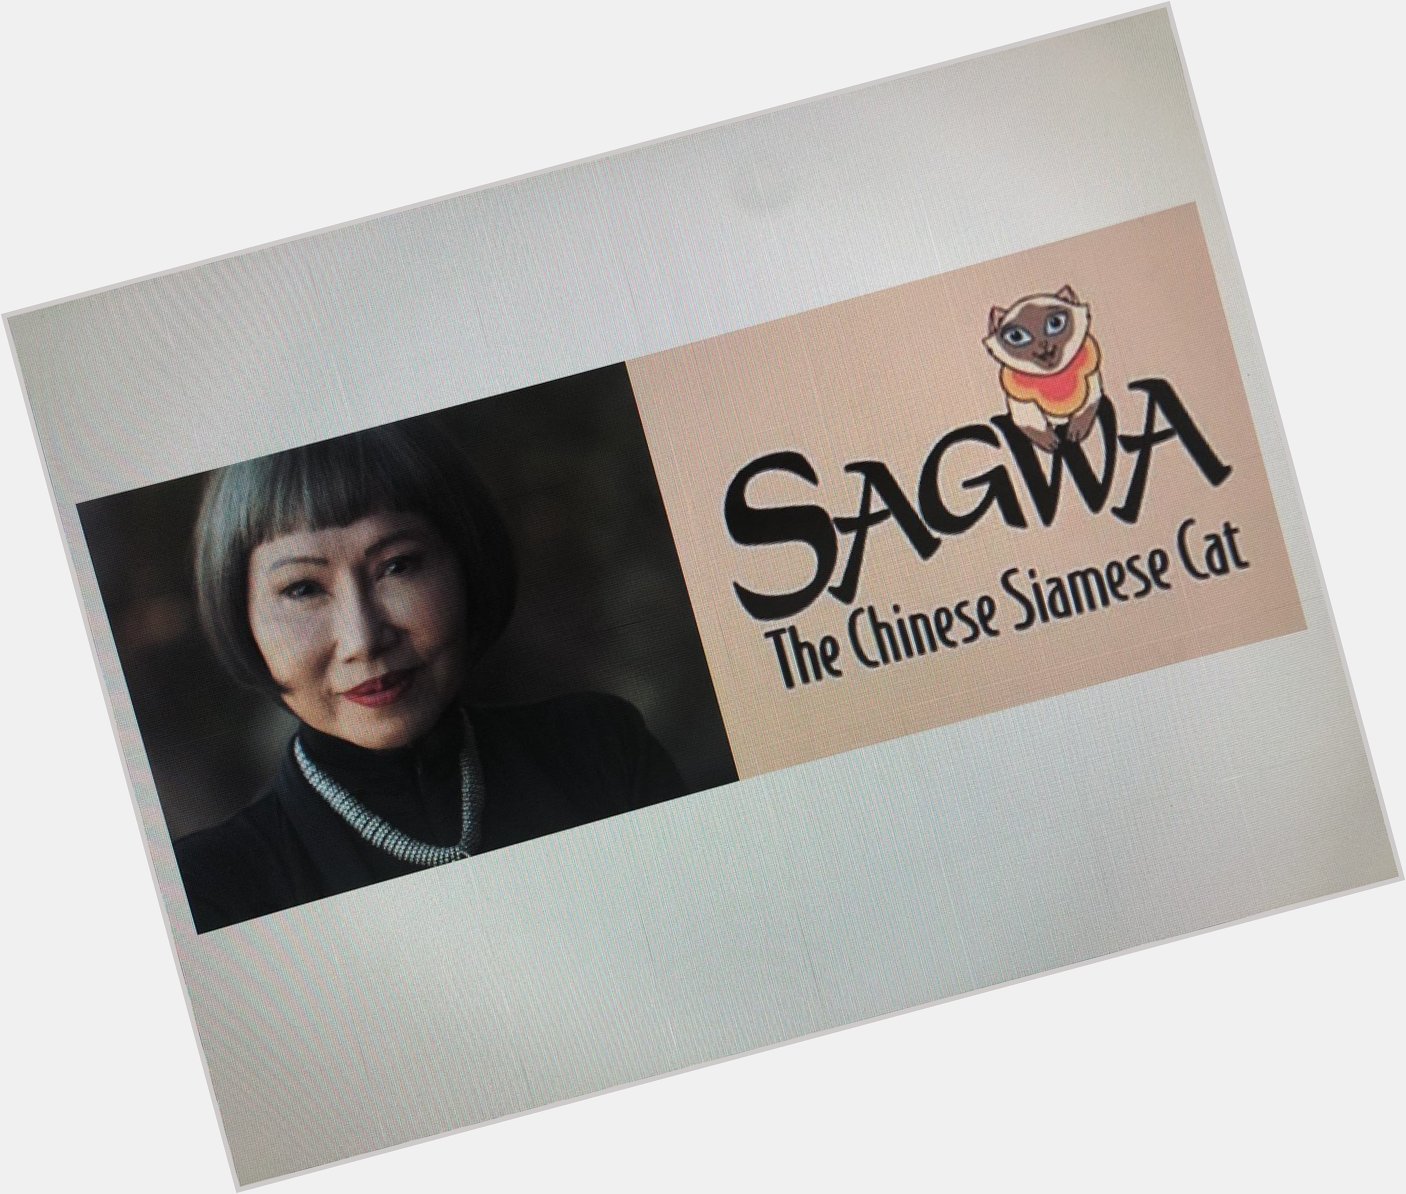 Happy 68th Birthday to Amy Tan! The creator of Sagwa, the Chinese Siamese Cat. 